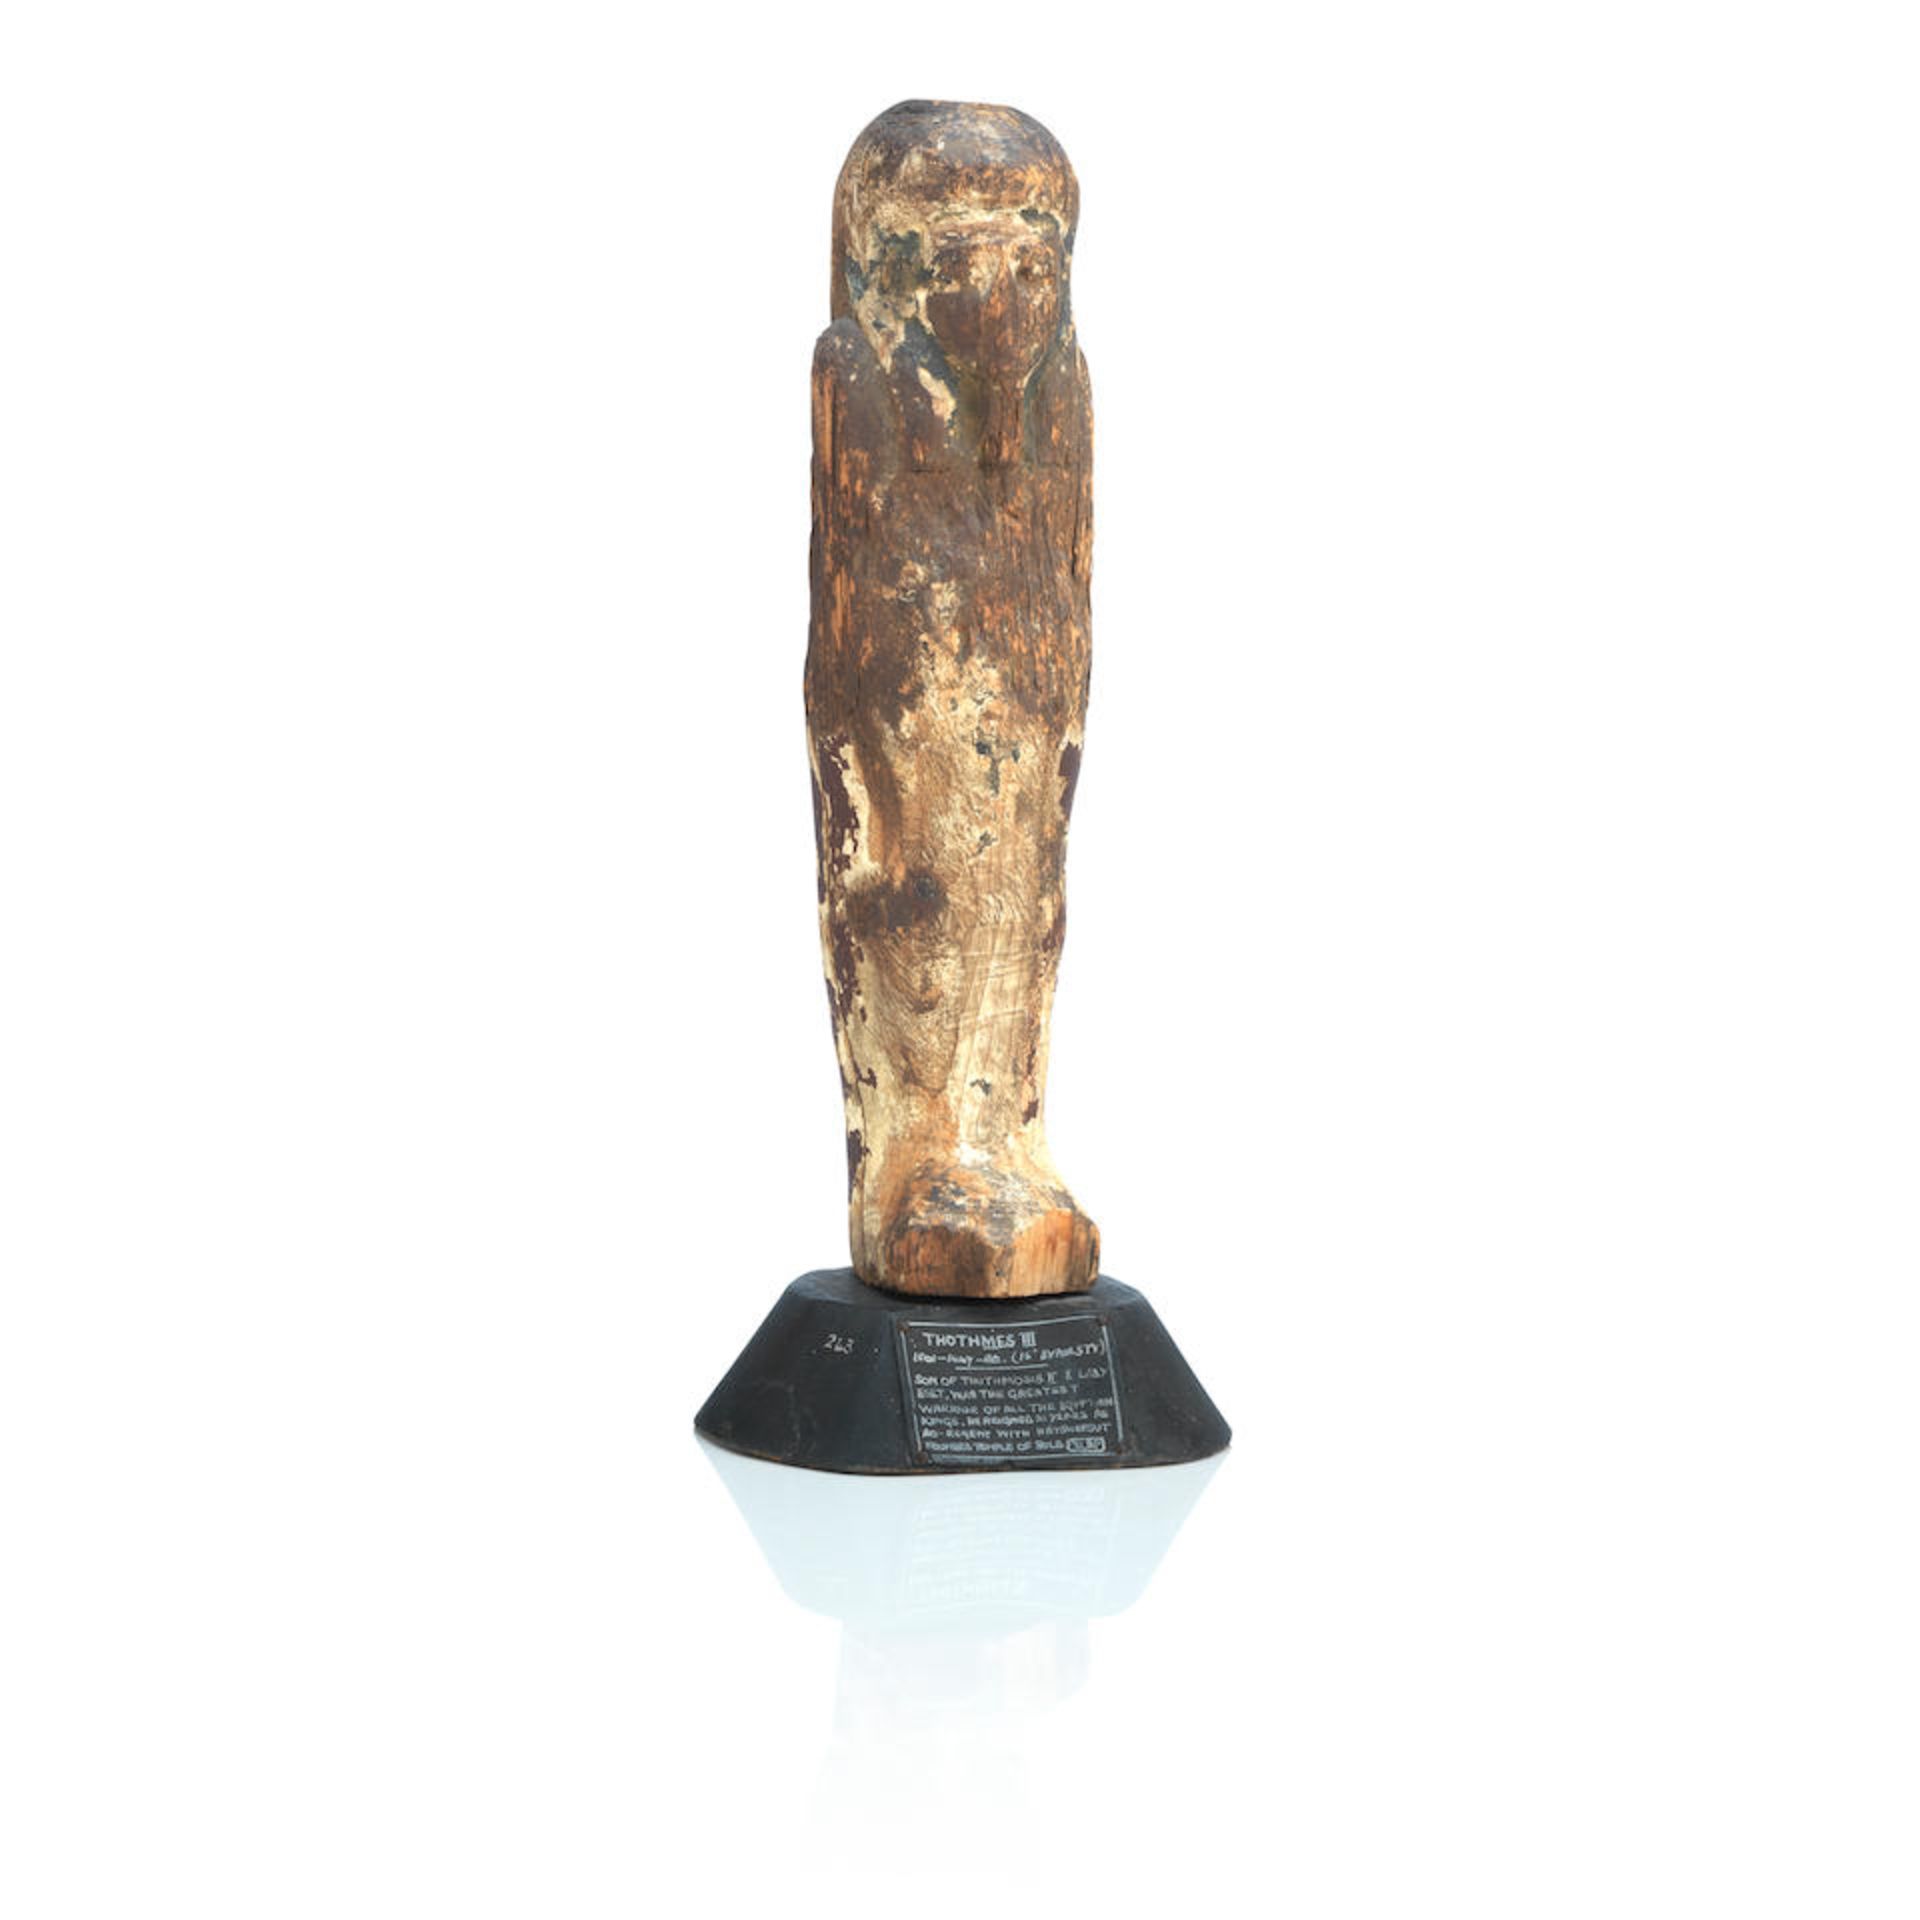 An ancient Egyptian carved wooden figure